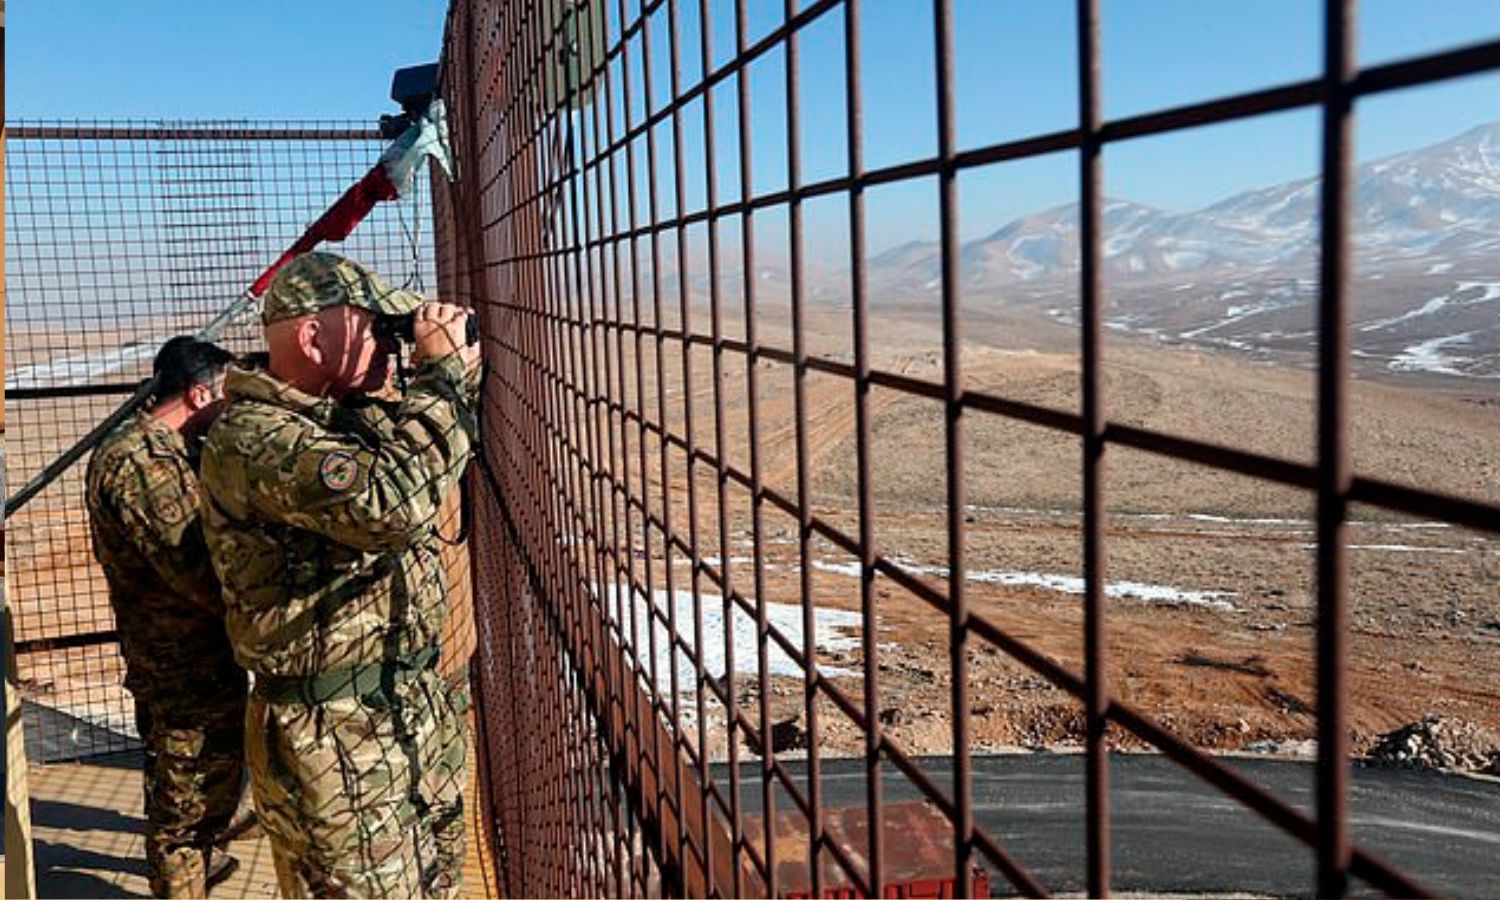 Britain emphasizes the importance of border watchtowers in protecting Lebanon and maintaining its security – January 2019 (Daily Mail)